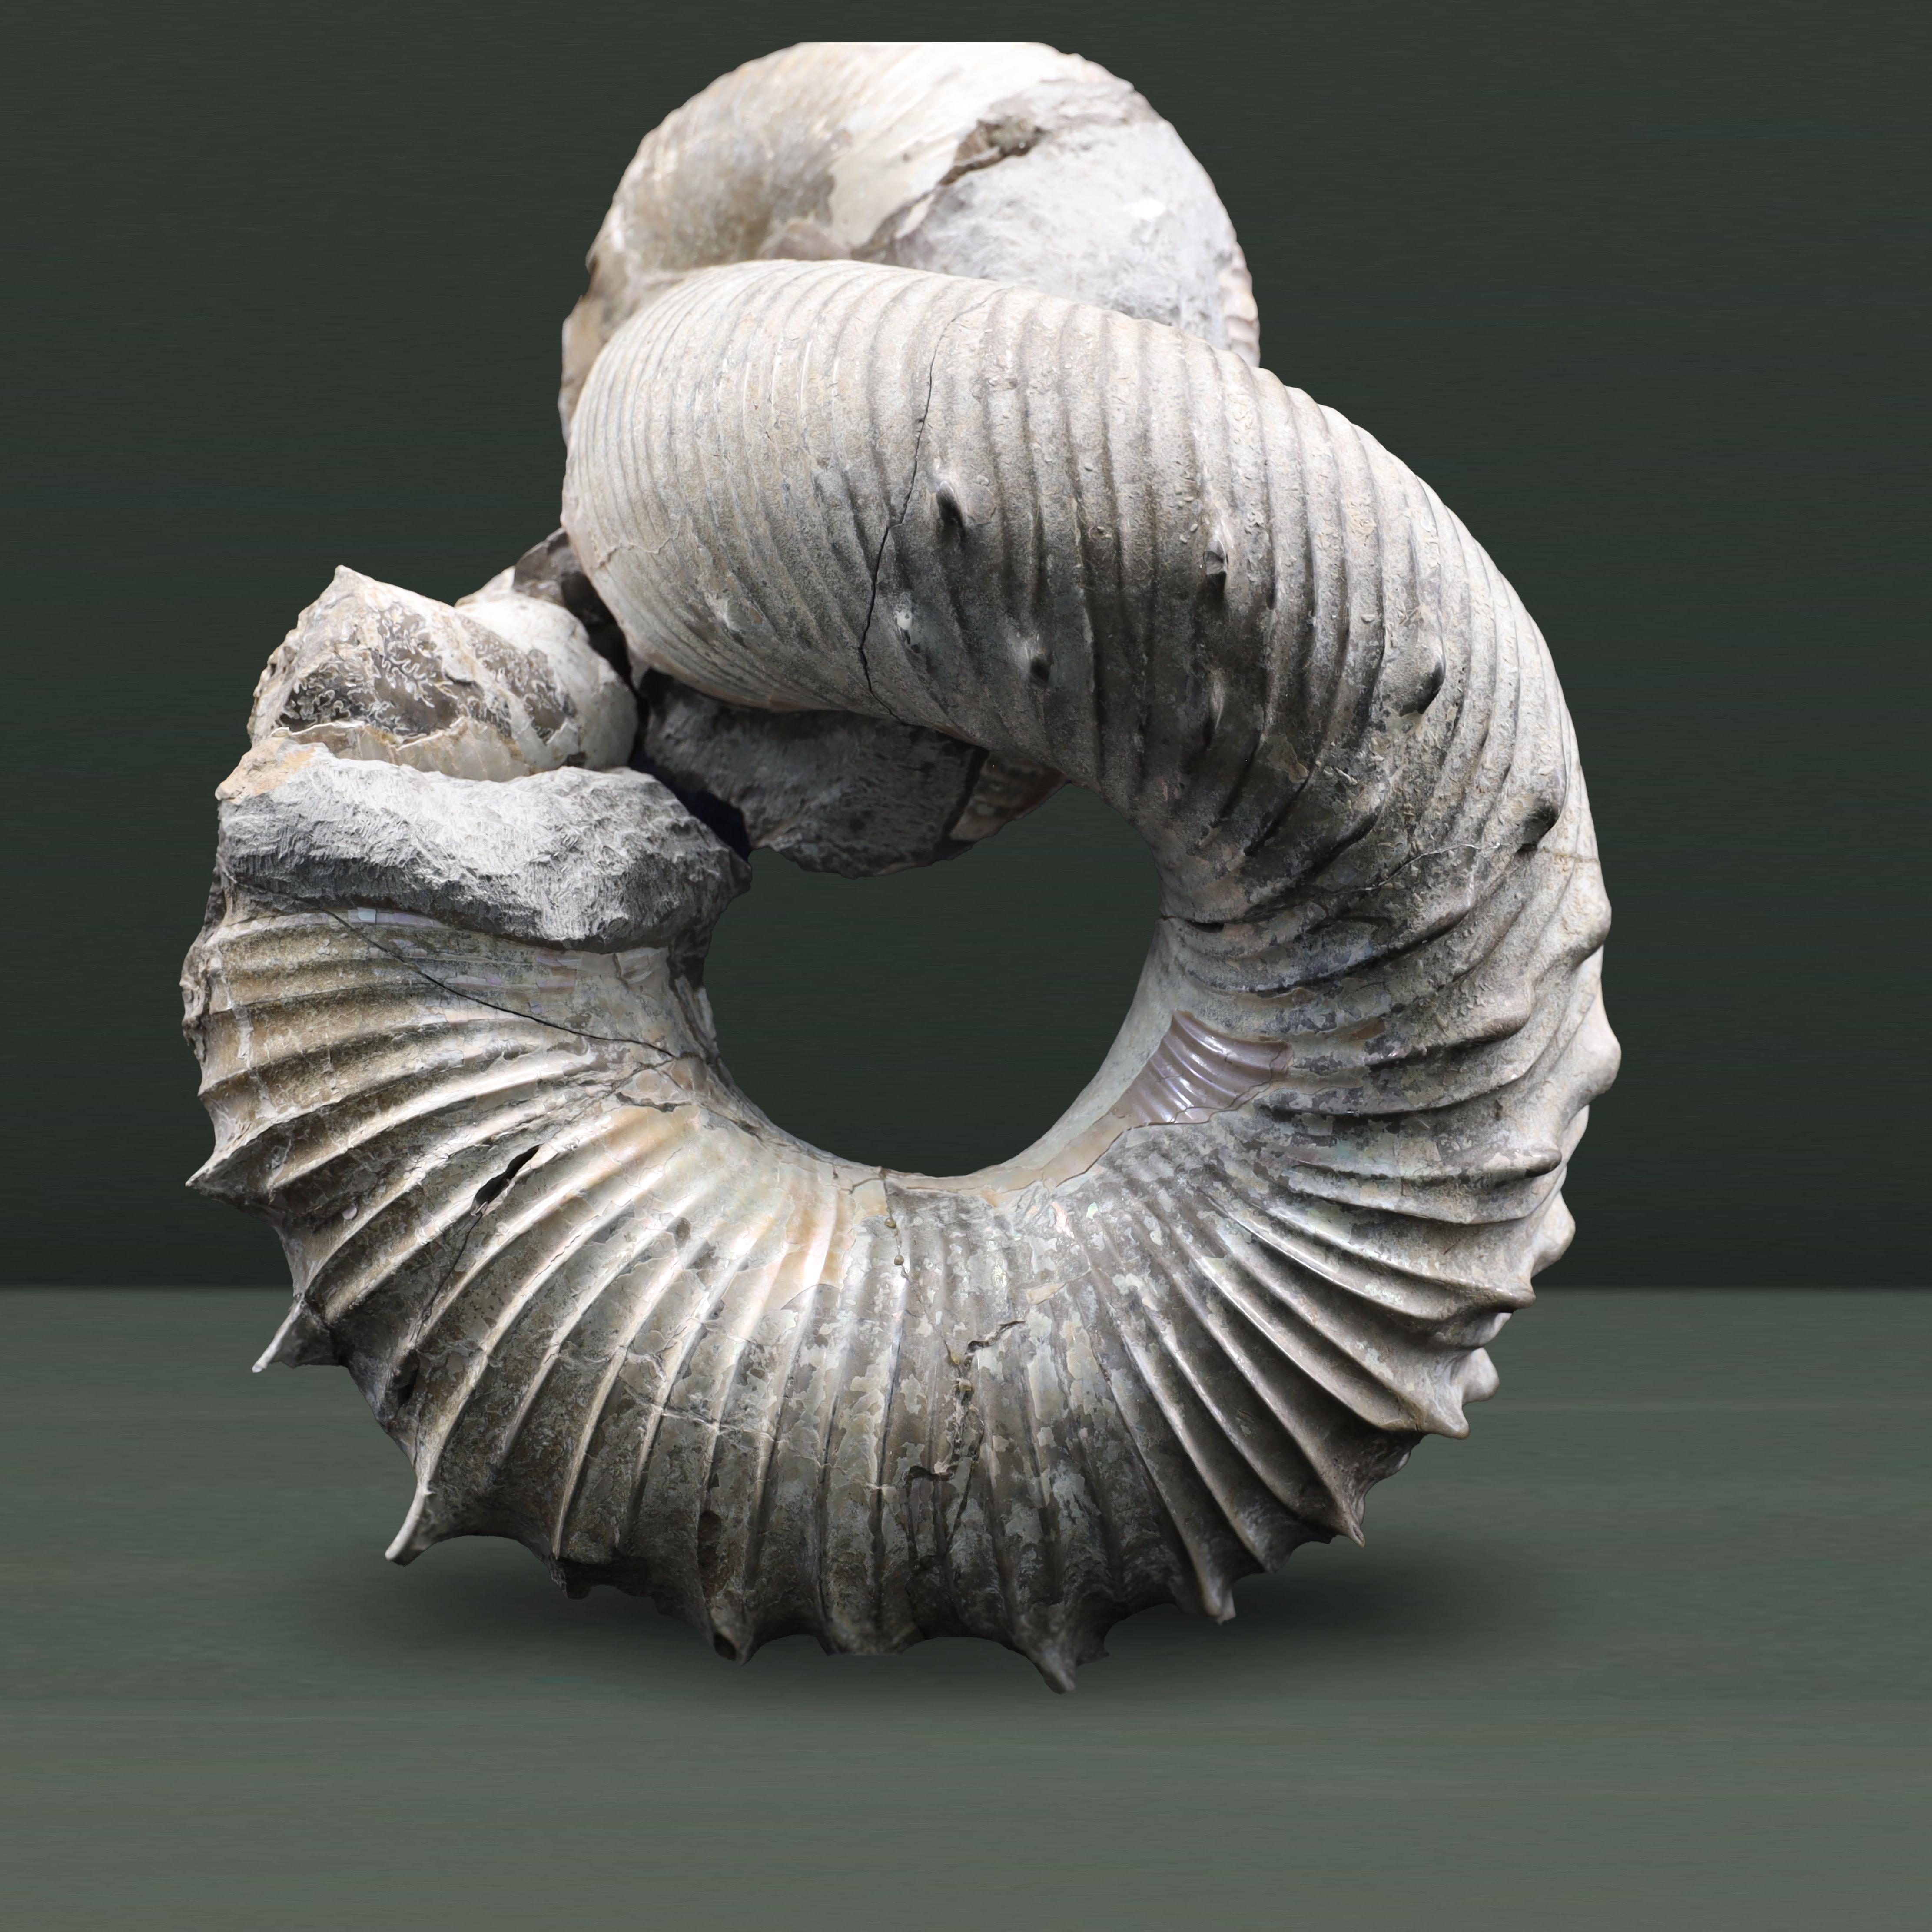 An ammonite fossil shaped like a donut with an extra curve on top.